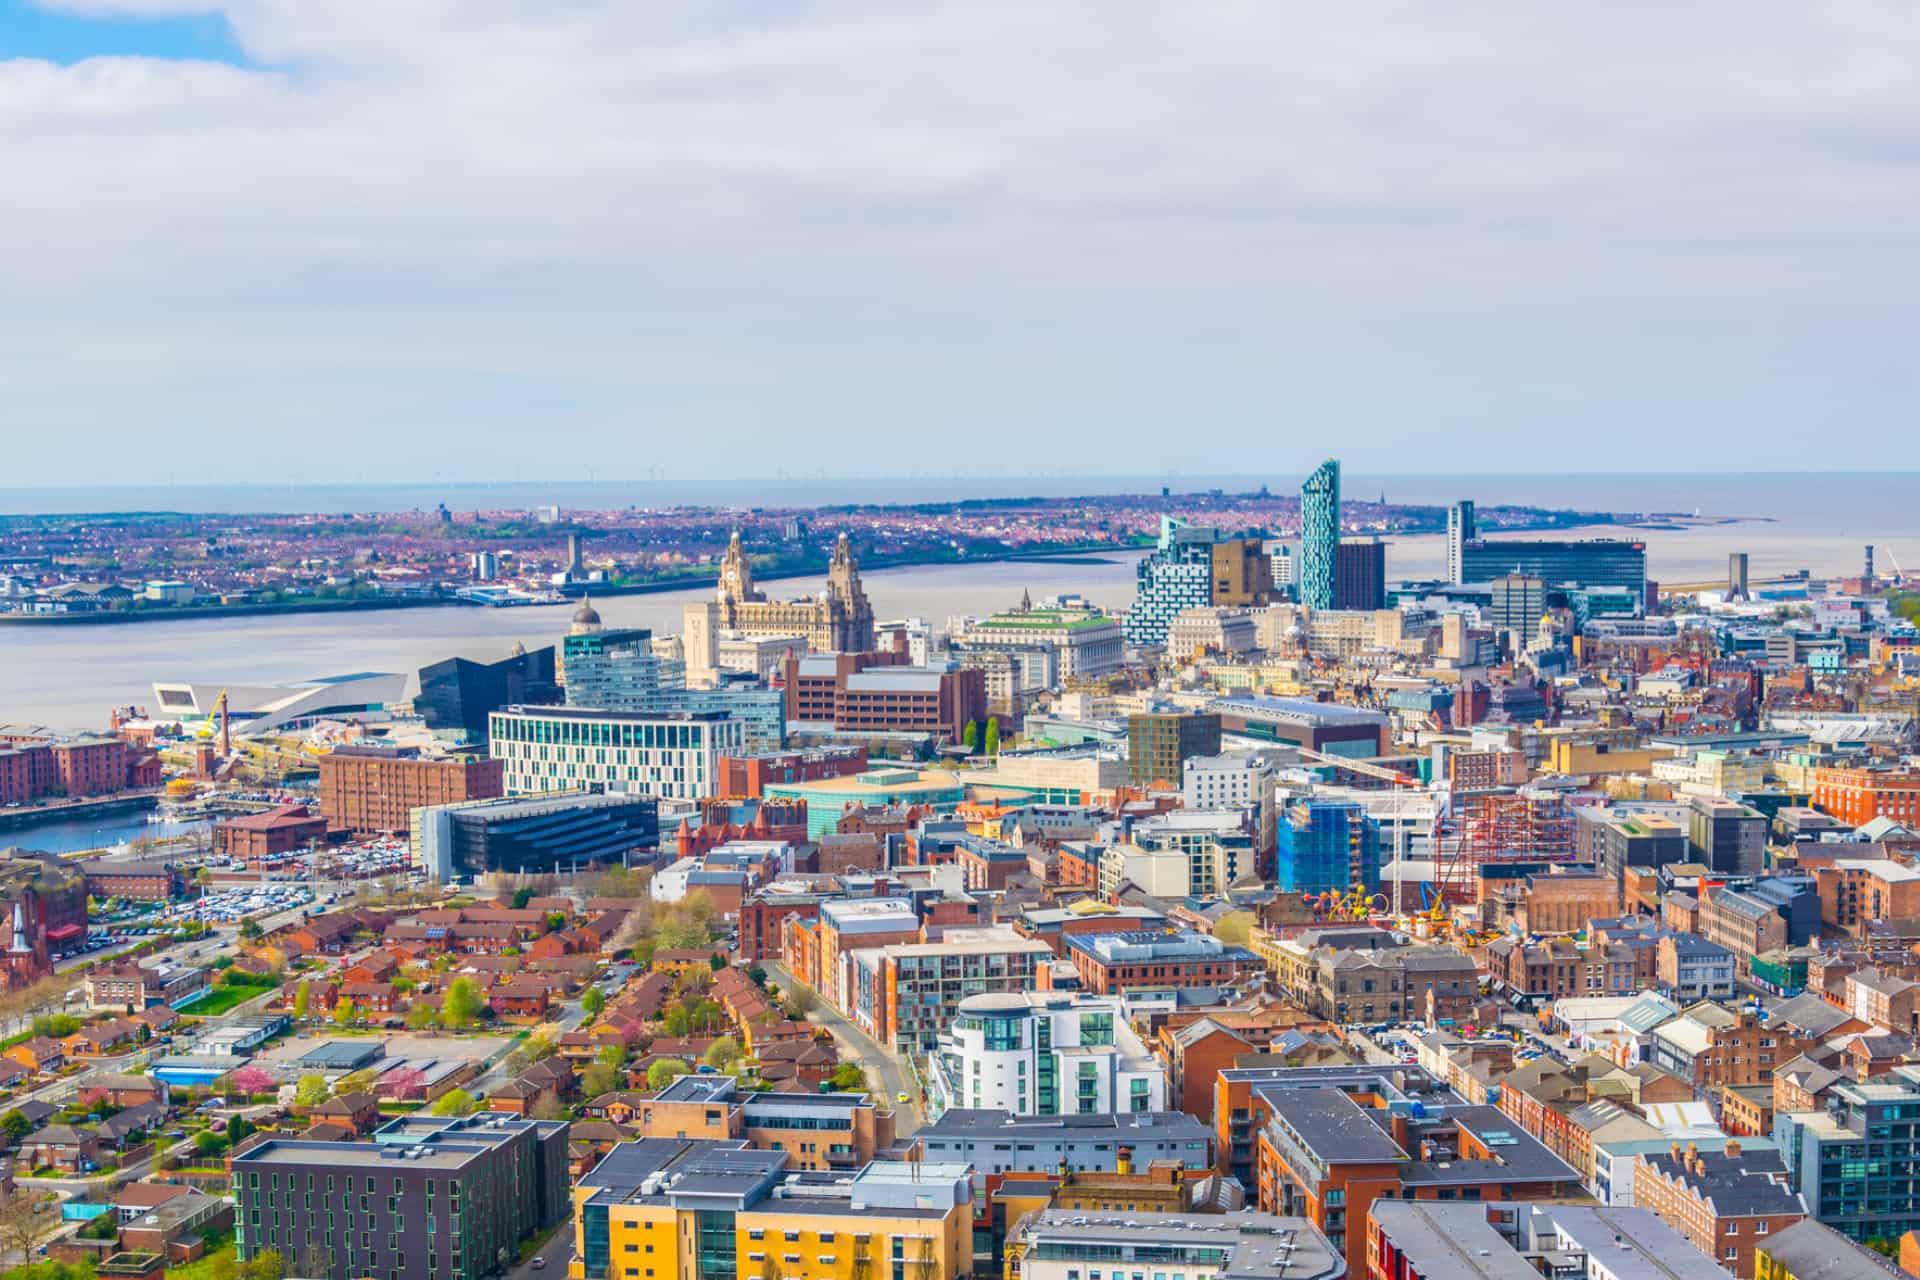 An aerial view of the Liverpool city.